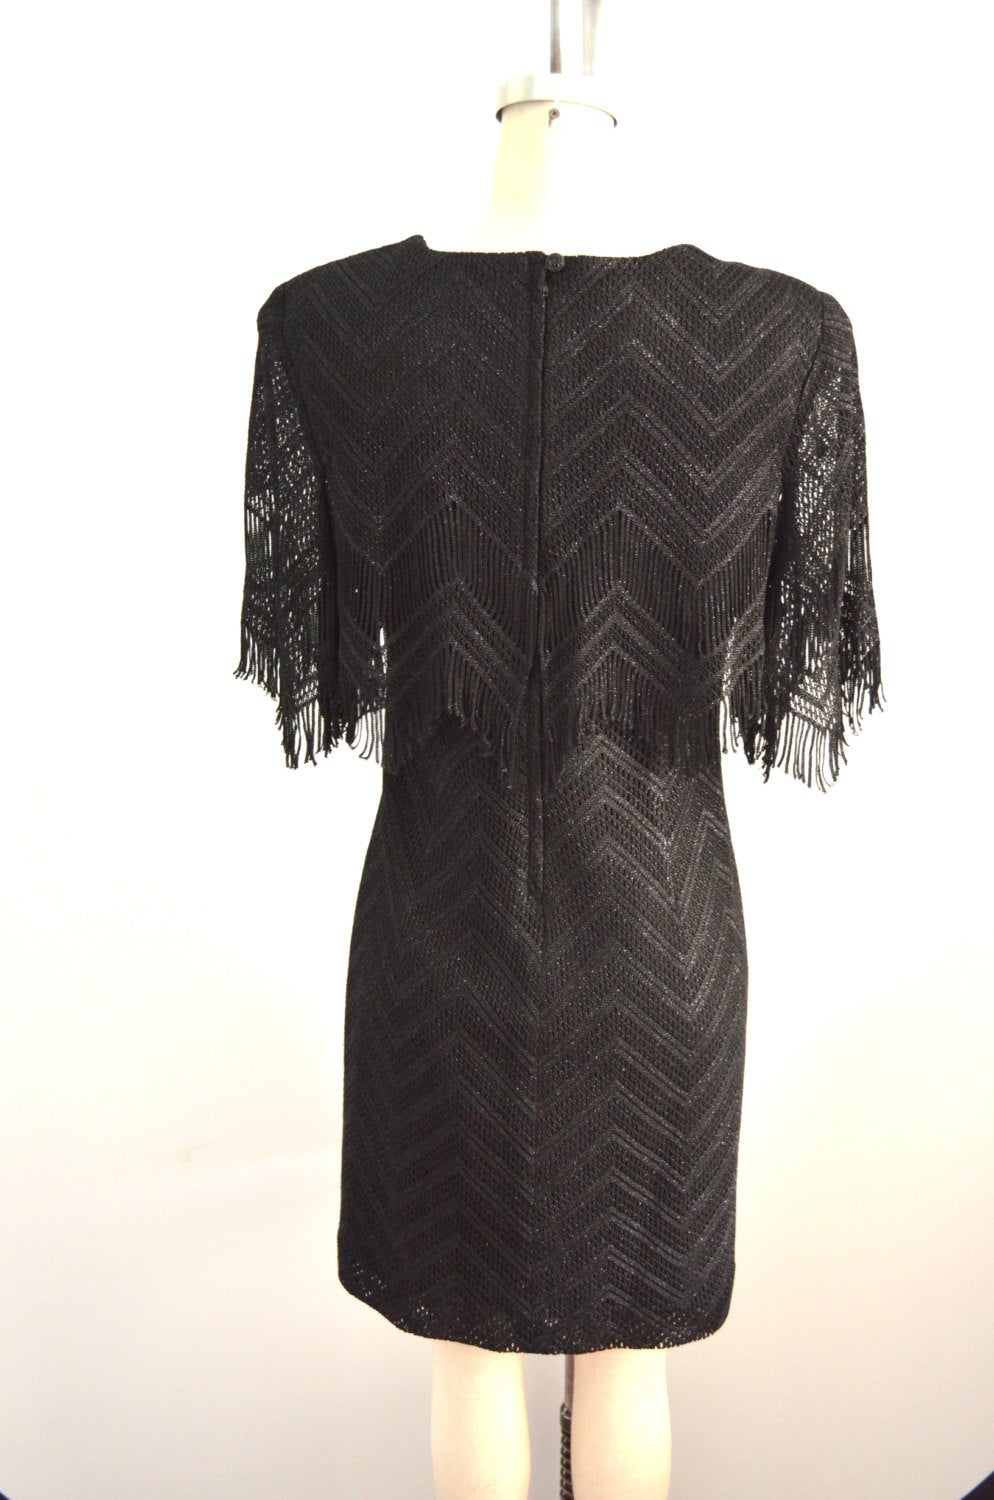 Great Gatsy Damianou Flapper Dress In Black Lace Fringe/Black Sequins Thread